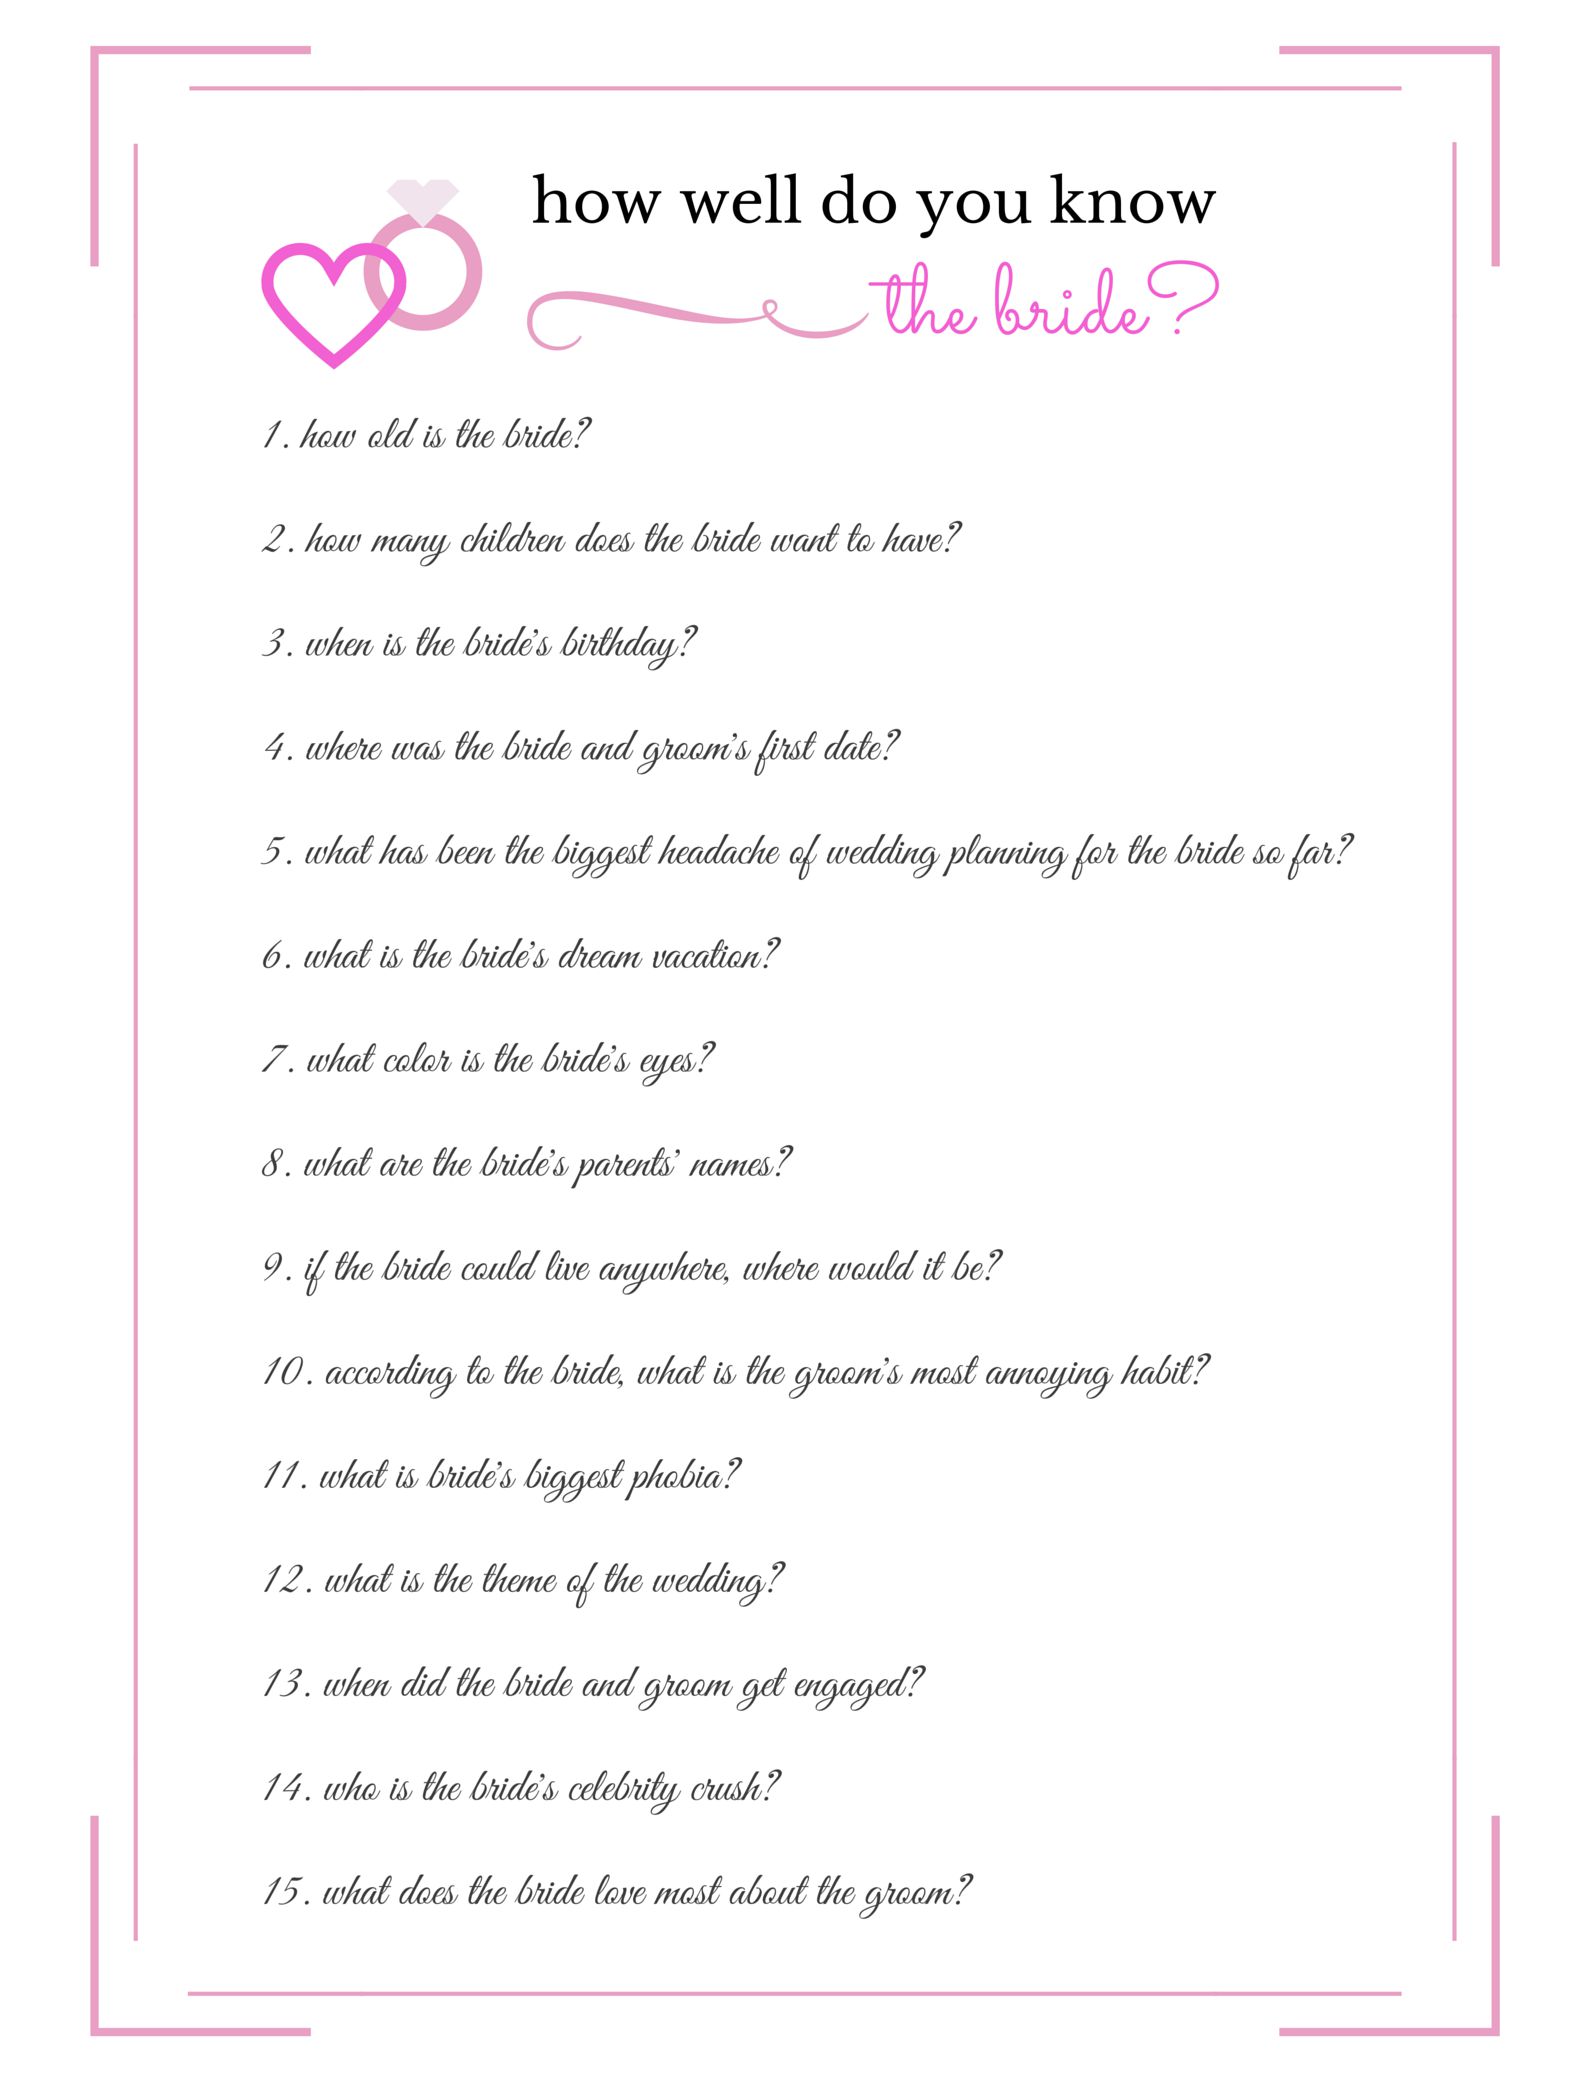 how well do you know the bride questions